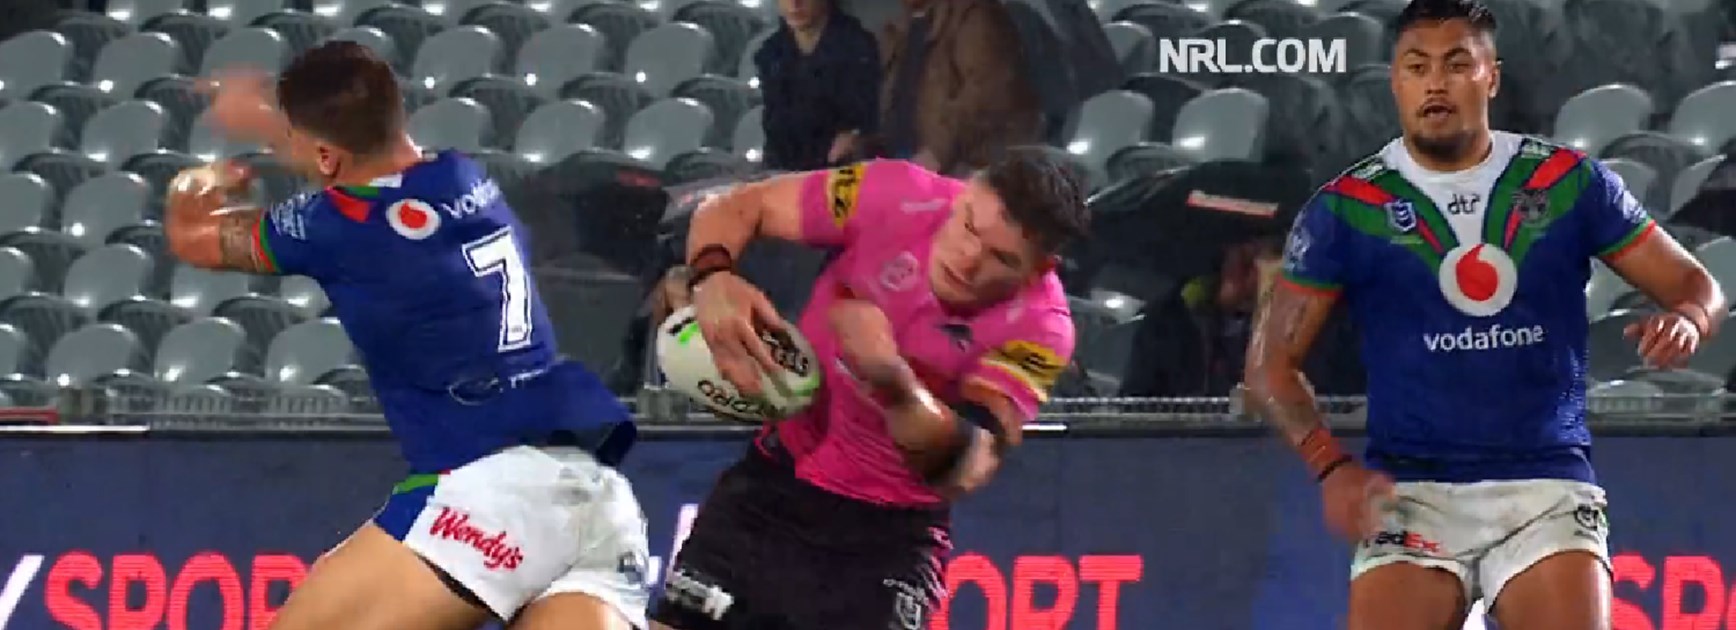 Tackle of the Week: Round 14 - Fearless Warrior comes up big